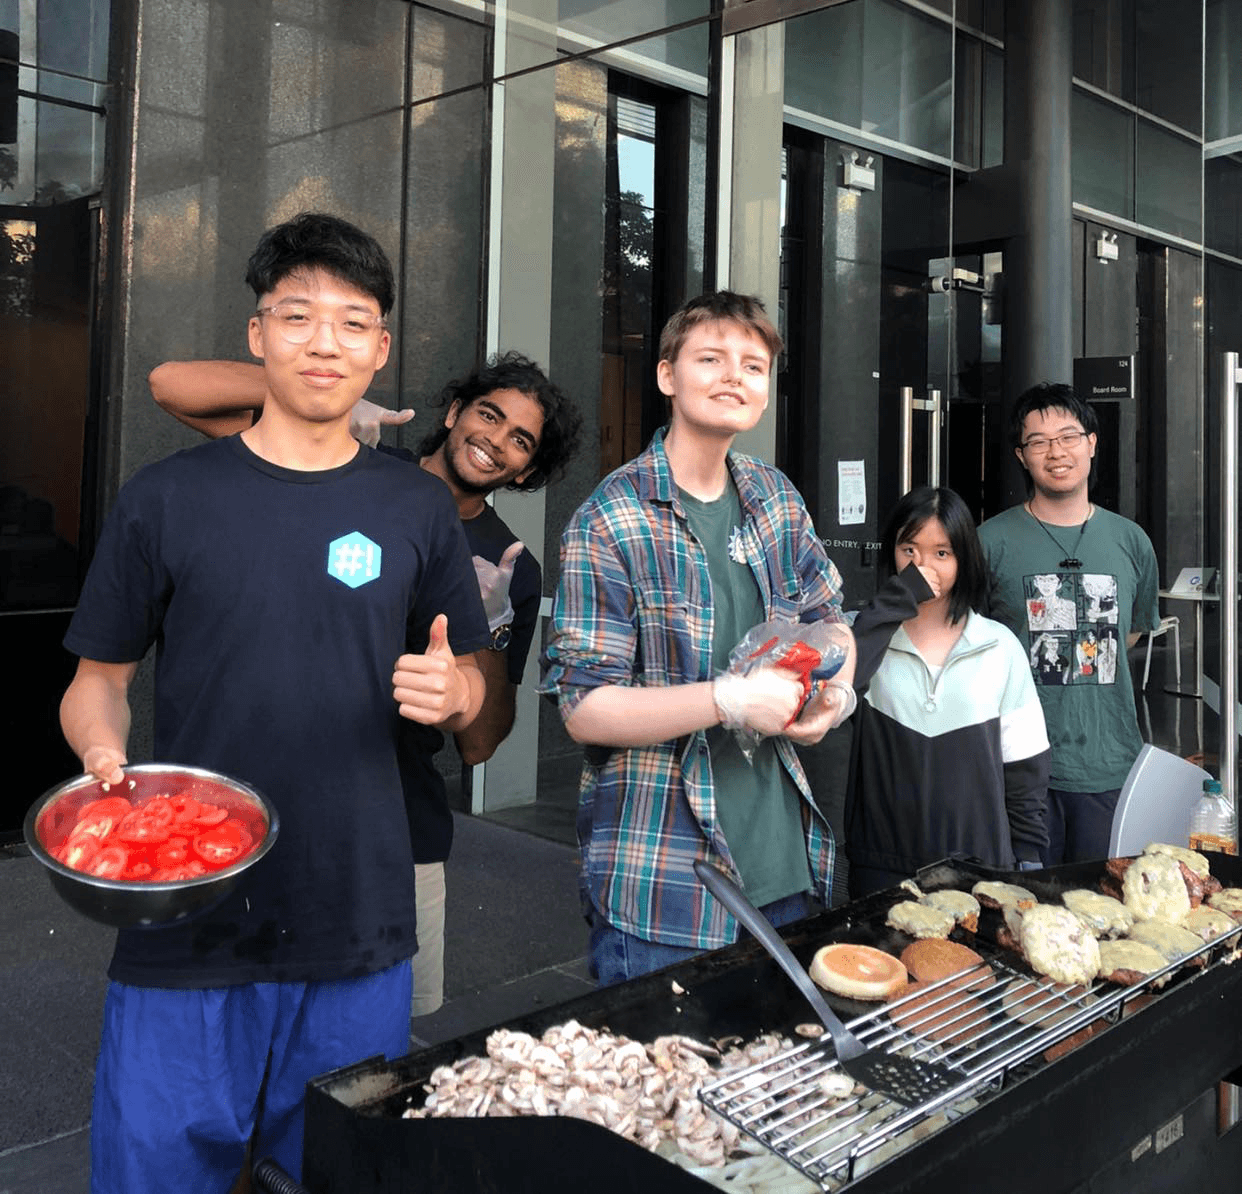 Students preparing food for a social night